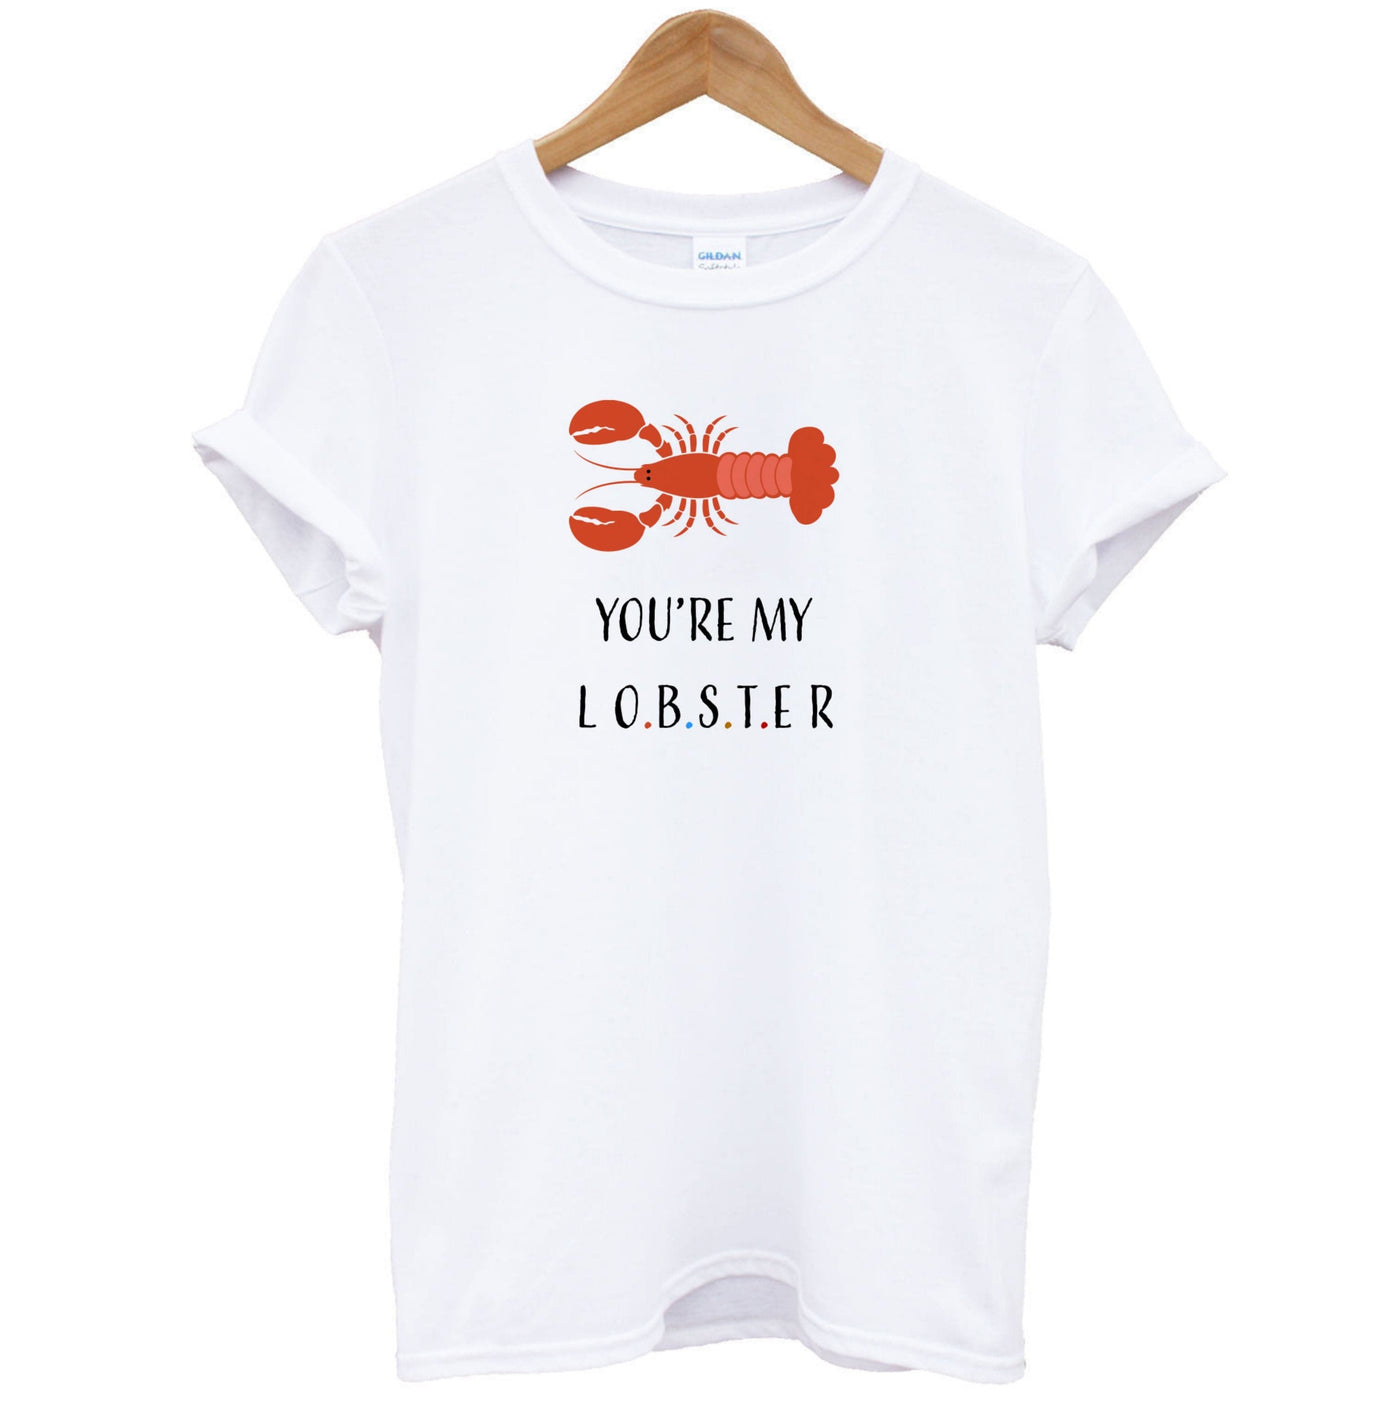 You're My Lobster - Friends T-Shirt